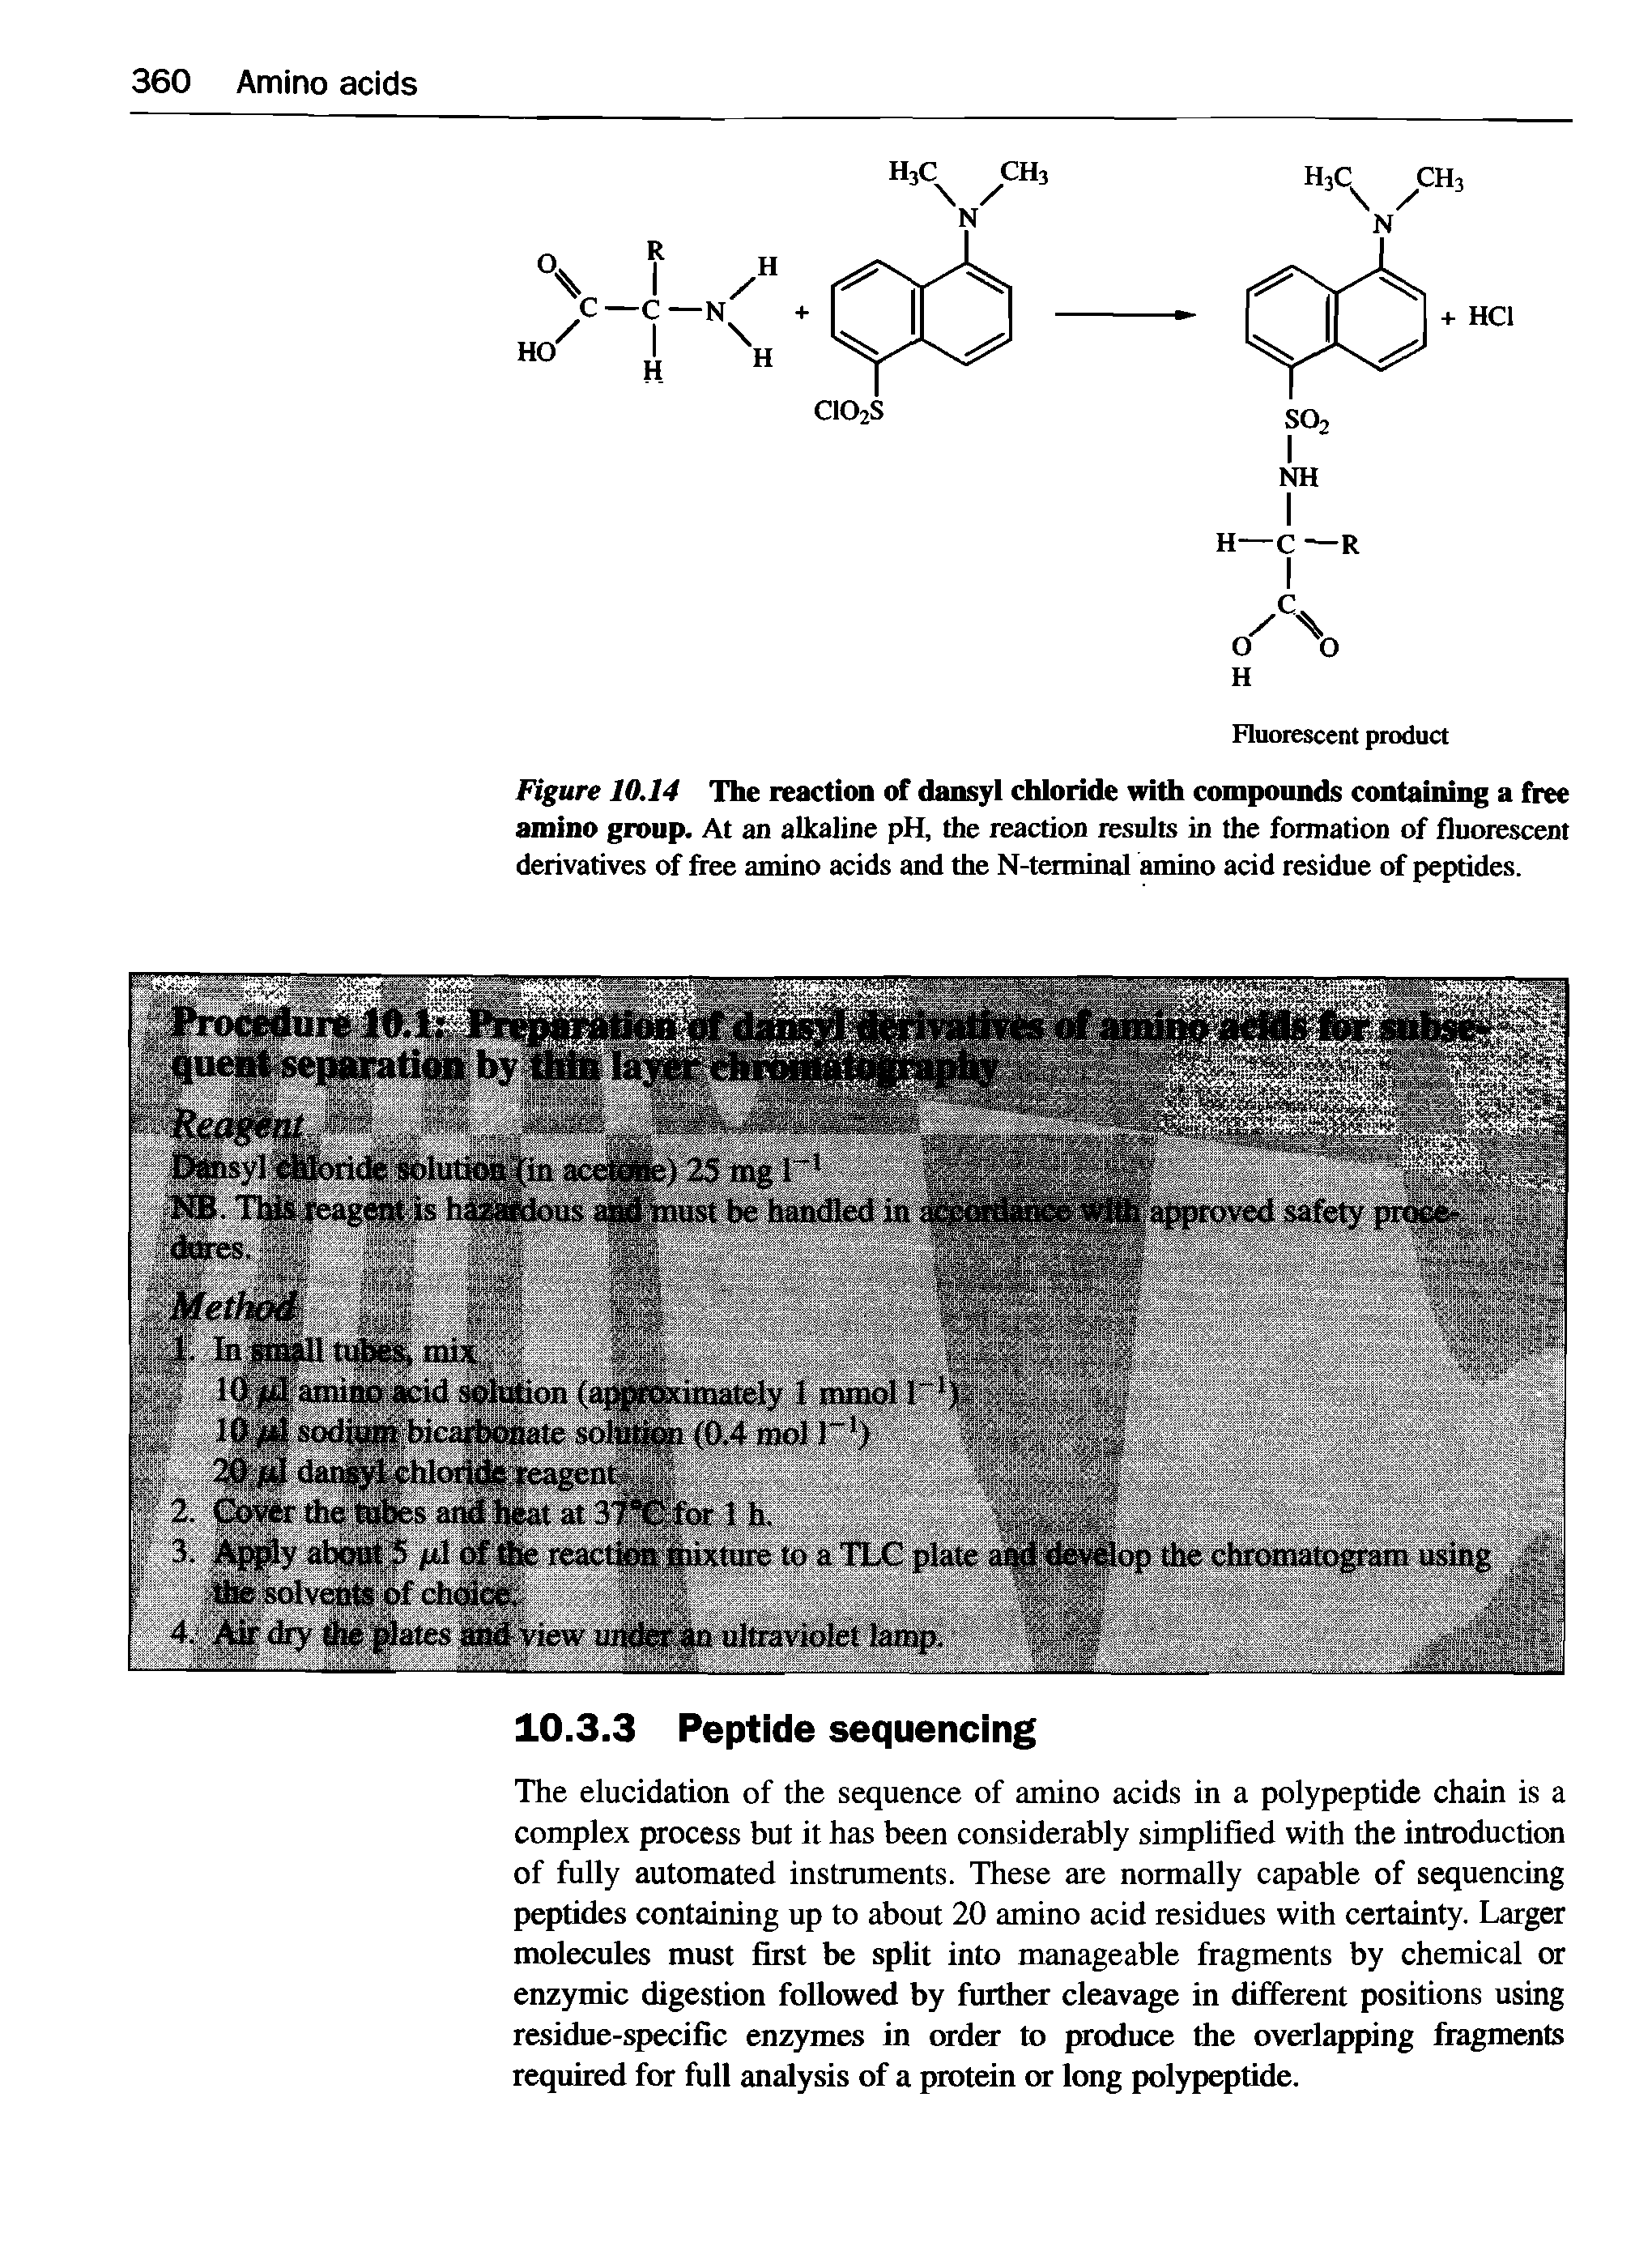 Figure 10.14 The reaction of dansyl chloride with compounds containing a free amino group. At an alkaline pH, the reaction results in the formation of fluorescent derivatives of free amino acids and the N-tenninal amino acid residue of peptides.